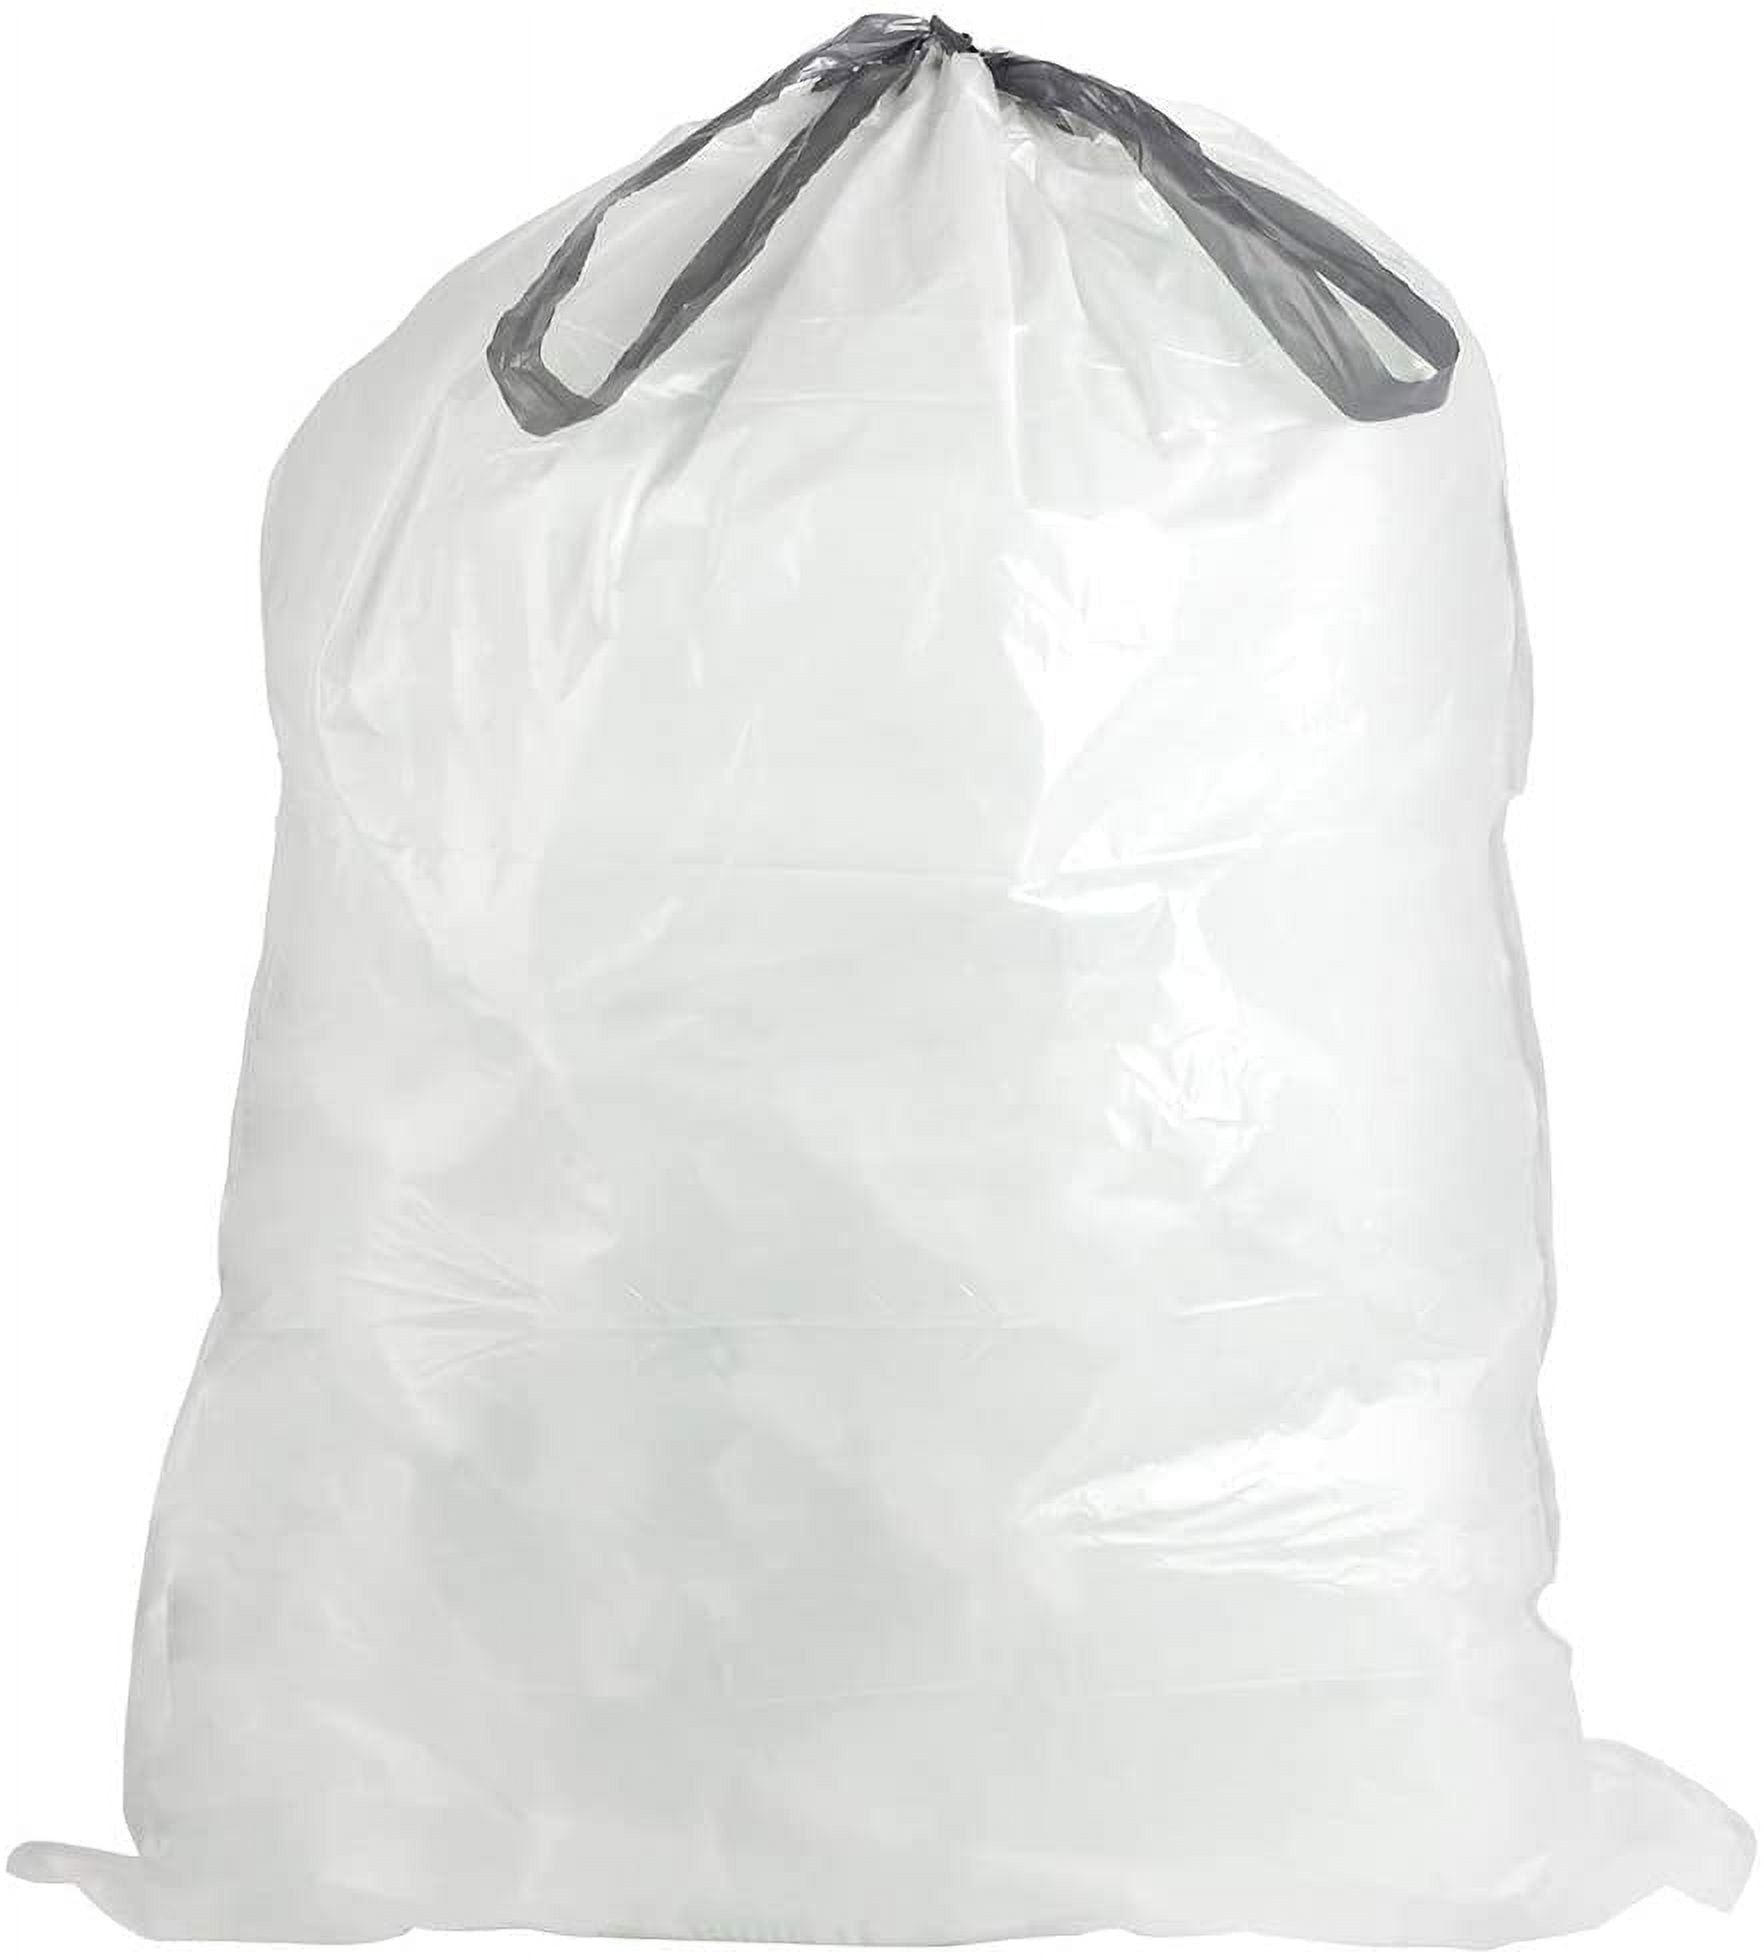 Plasticplace Simplehuman ® Code N Compatible (x)‚ Custom Fit Trash Bags‚  12-13 Gallon / 45-50 Liter White Drawstring Garbage Liners‚ 22.5 x 31.5  (50 Count) 